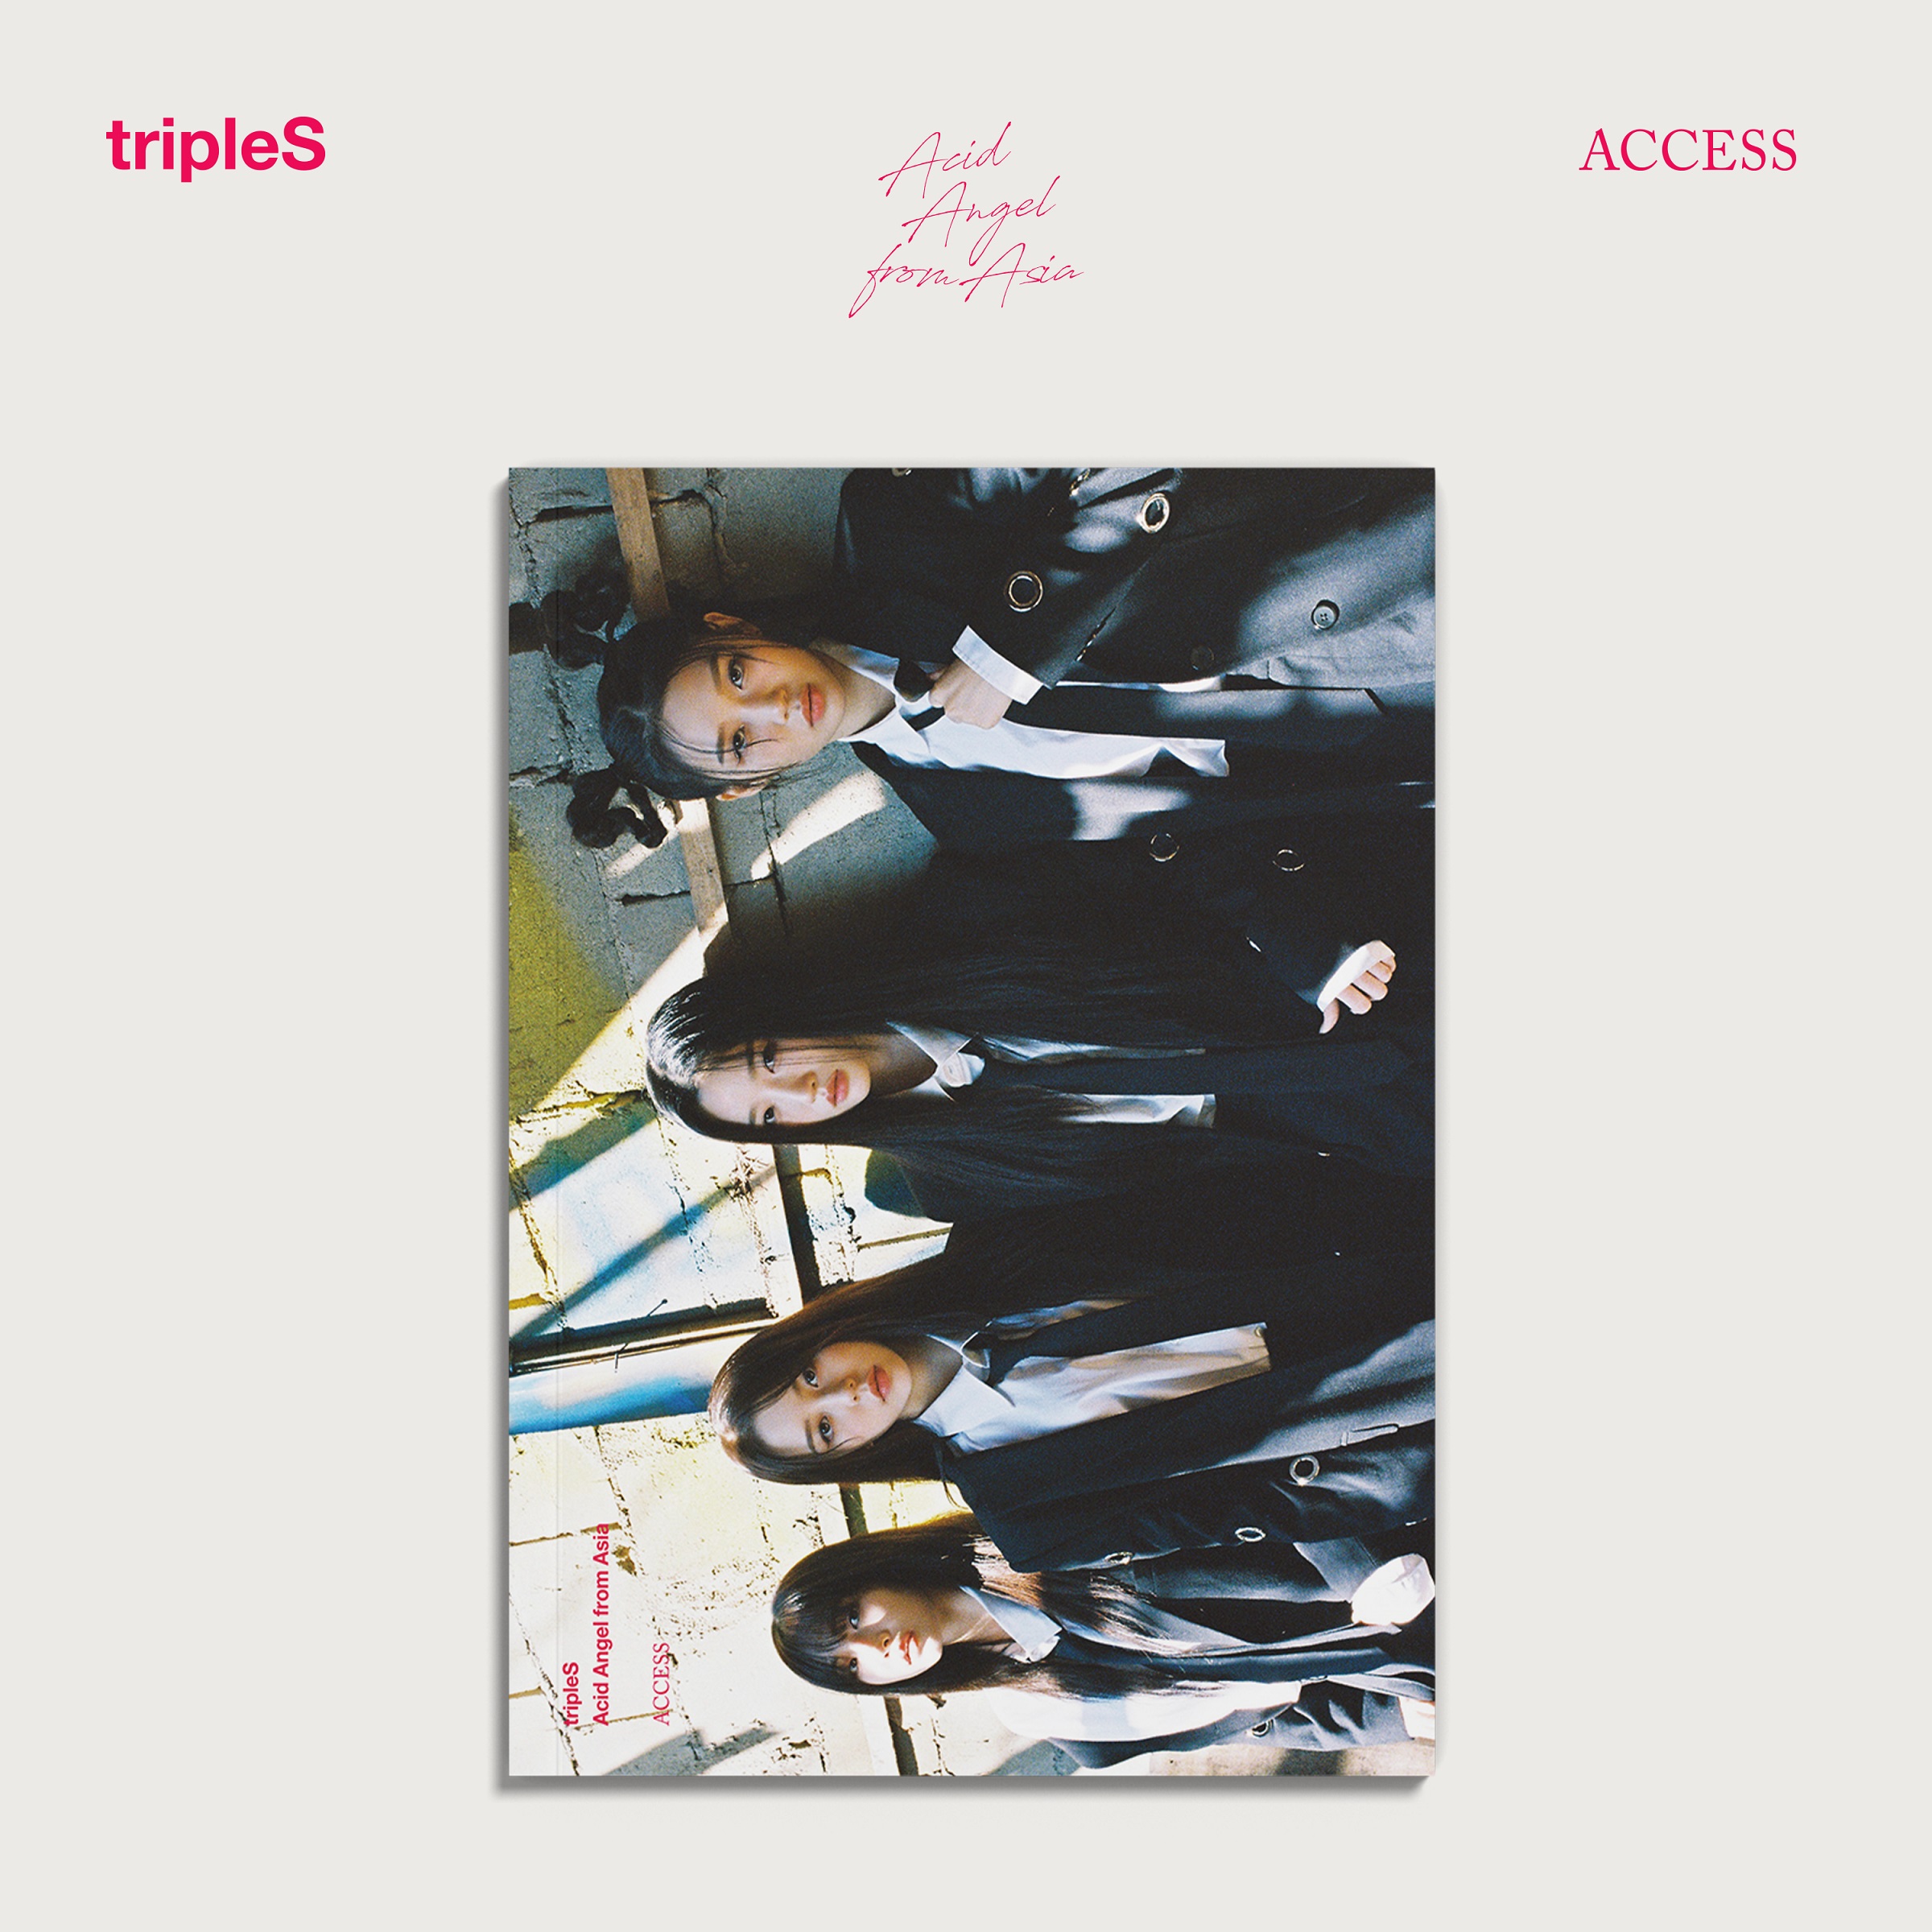 [nugupromoter] tripleS - Acid Angel from Asia [ACCESS] (A ver.)